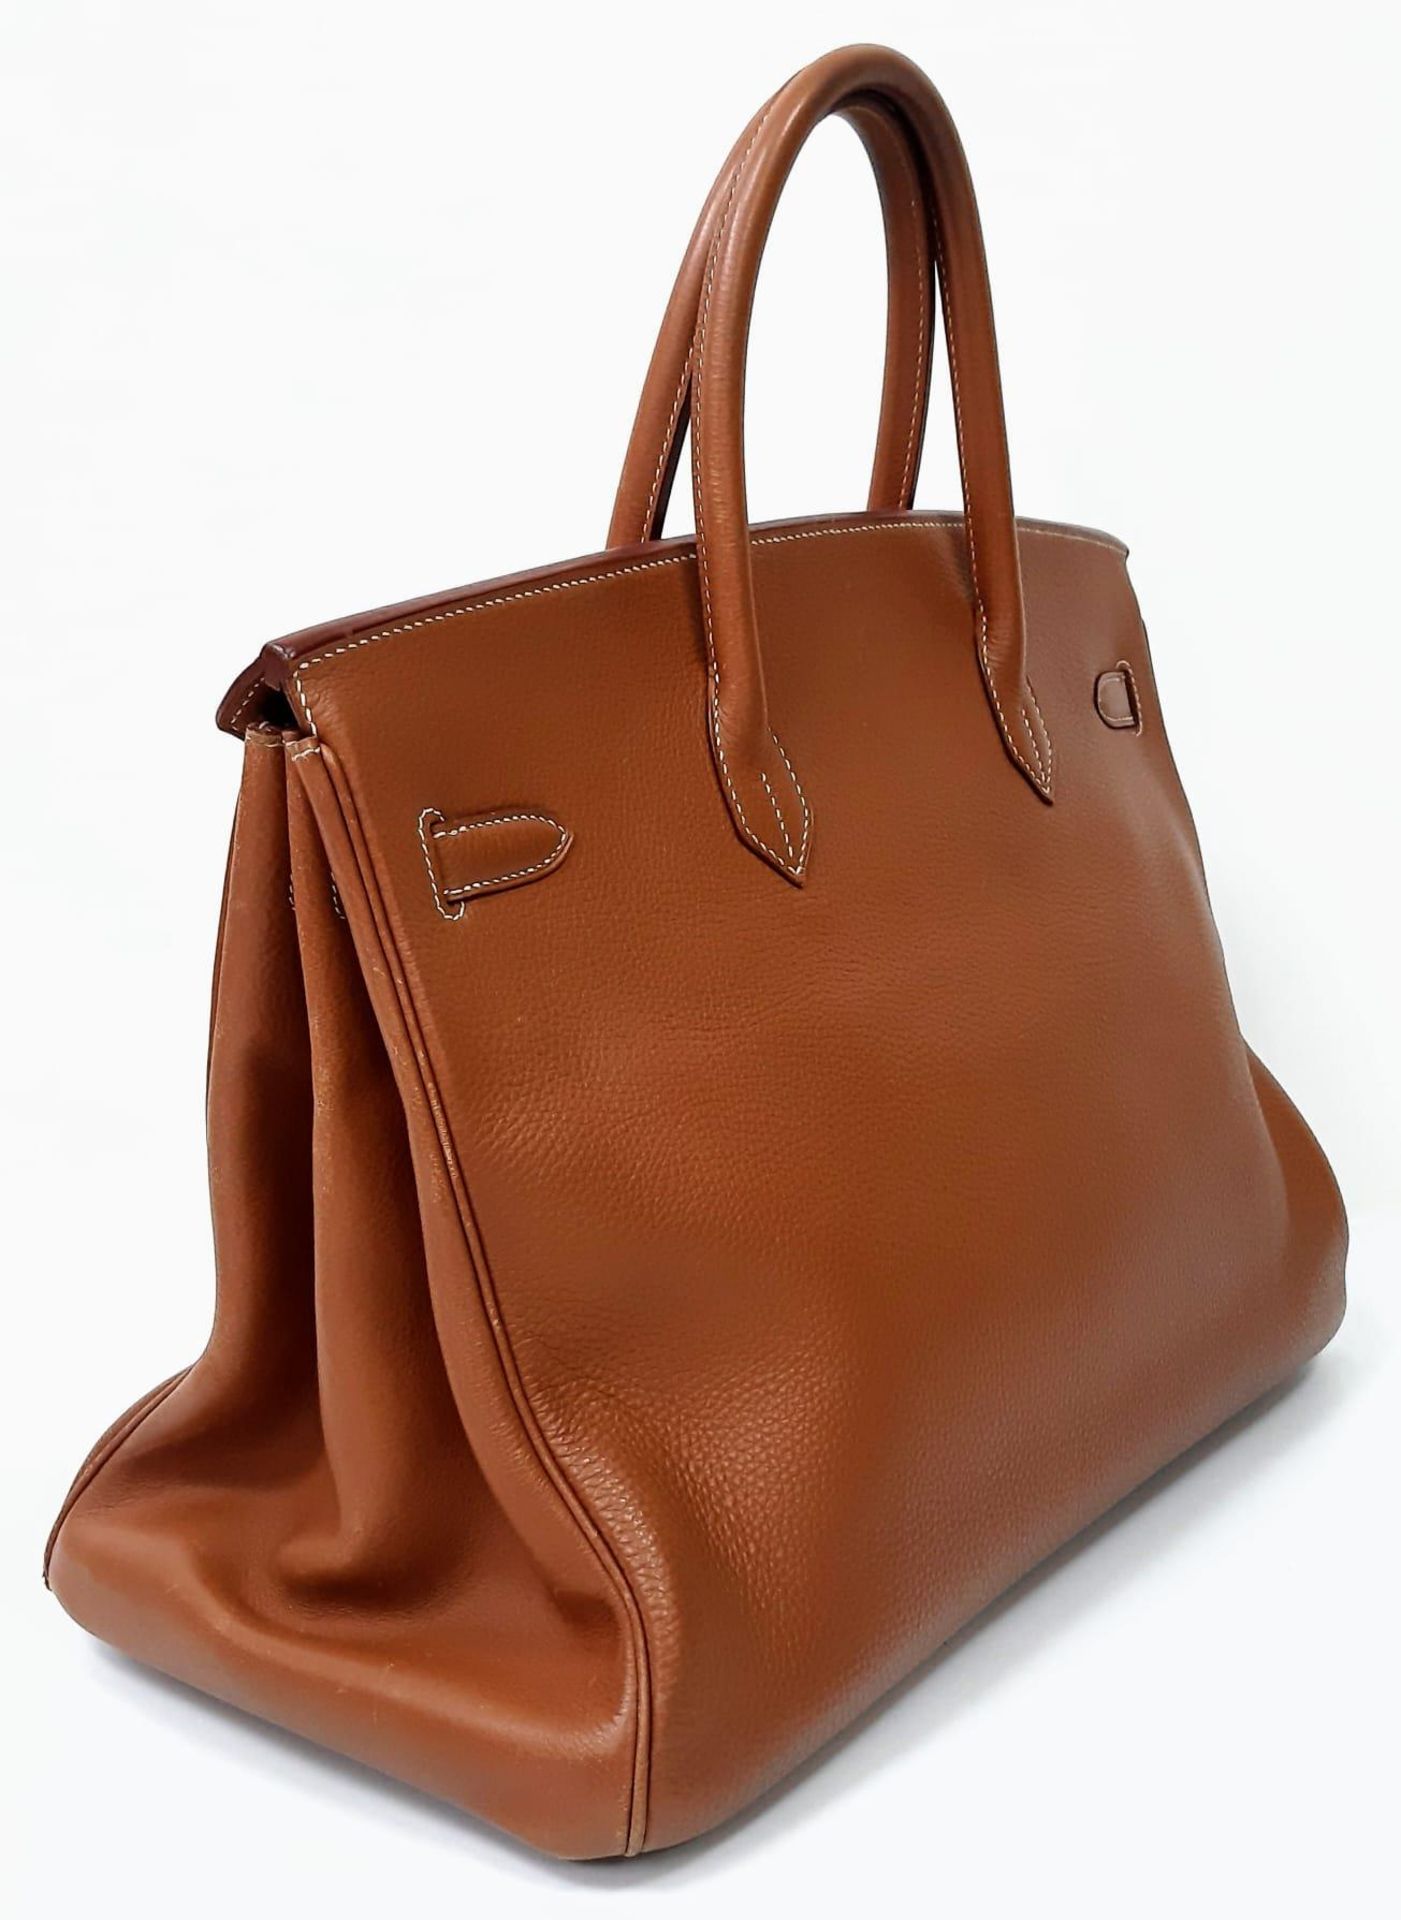 A Hermes Birkin Brown Leather Tote Bag. Handcrafted from the highest quality leather by skilled - Bild 7 aus 17